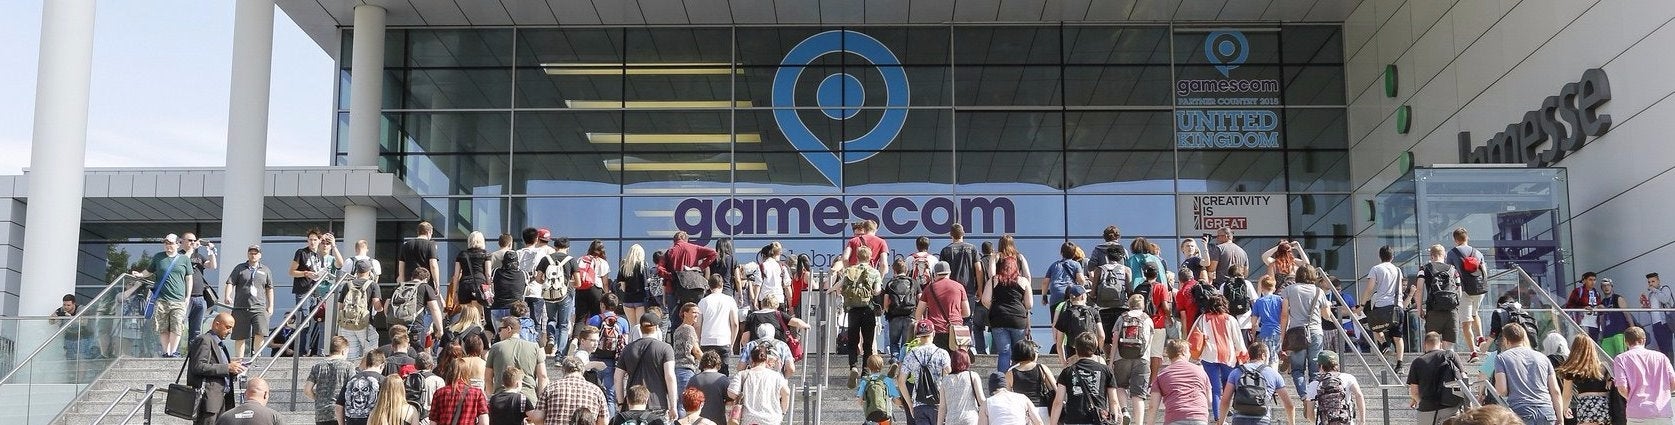 Image for What's happening with gamescom's conferences this week